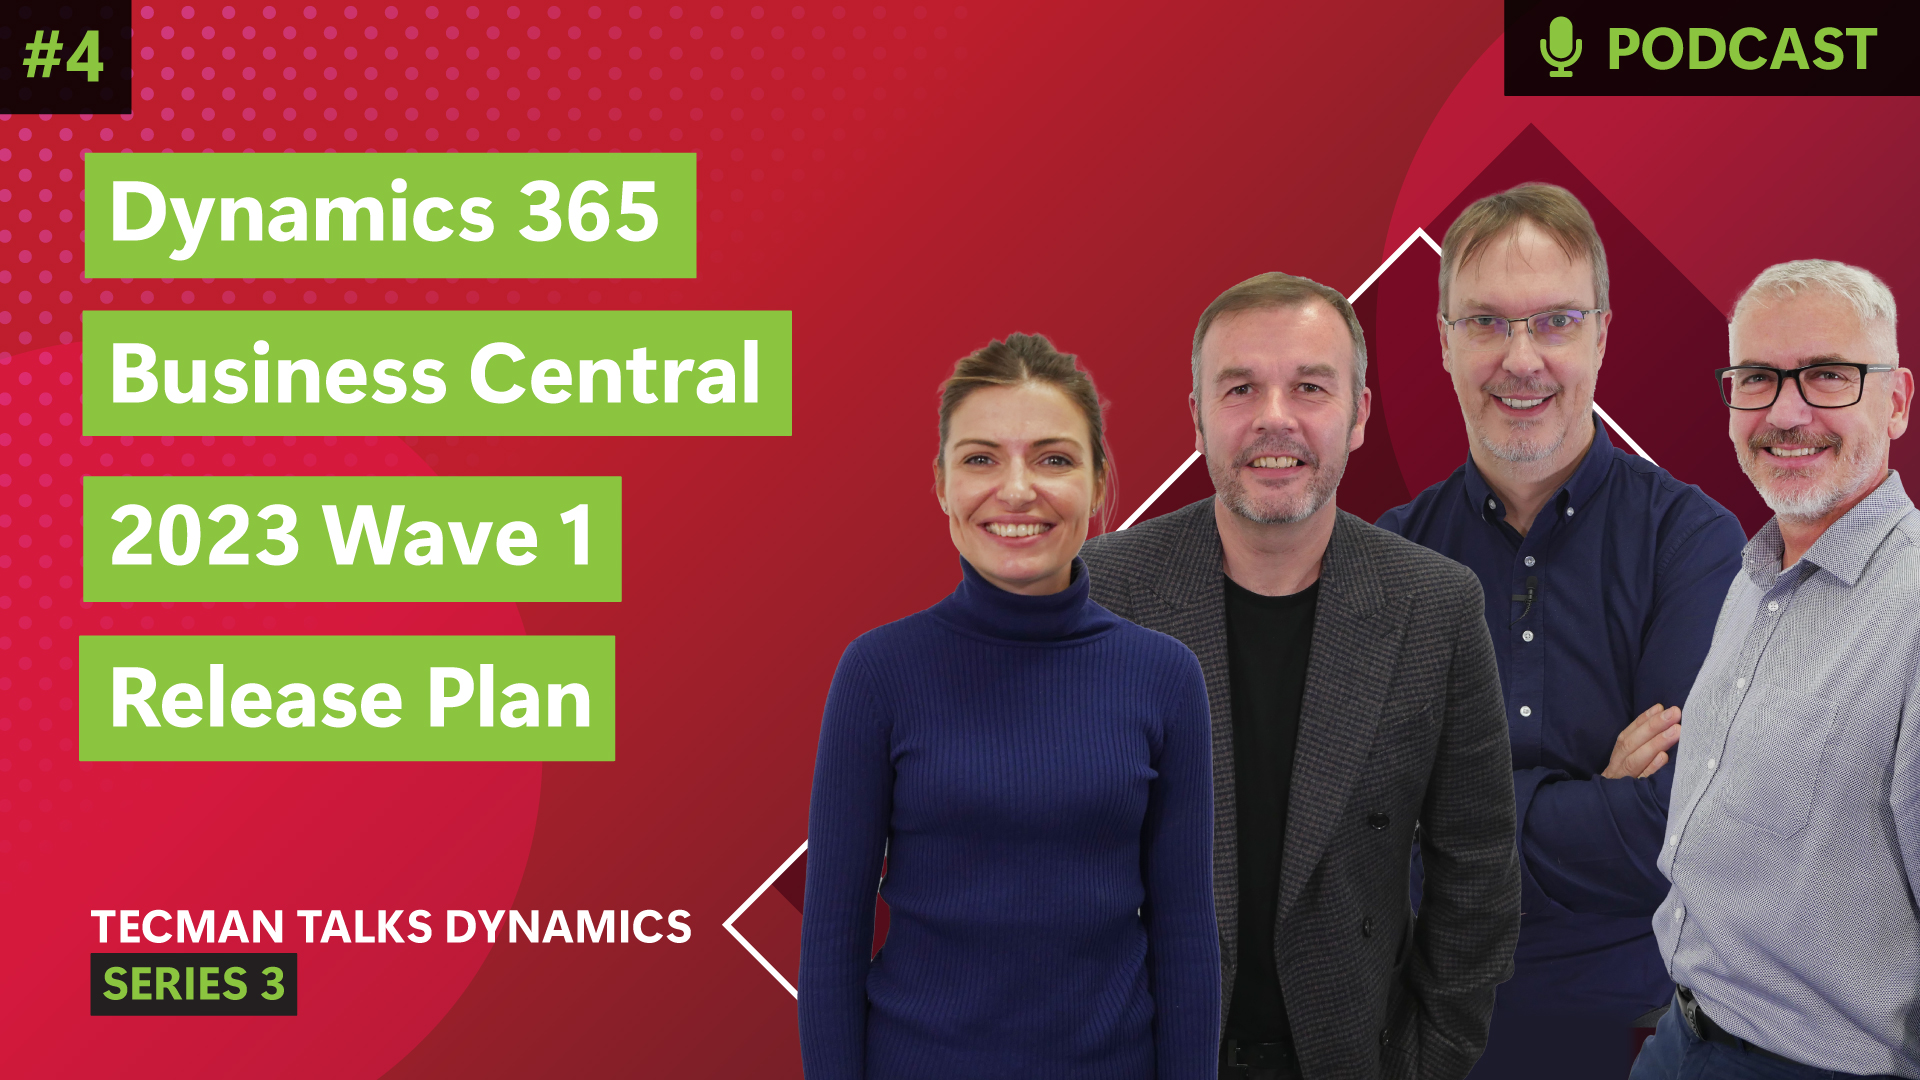 Ep4: Microsoft Dynamics 365 Business Central 2023 Wave 1 Release Plan